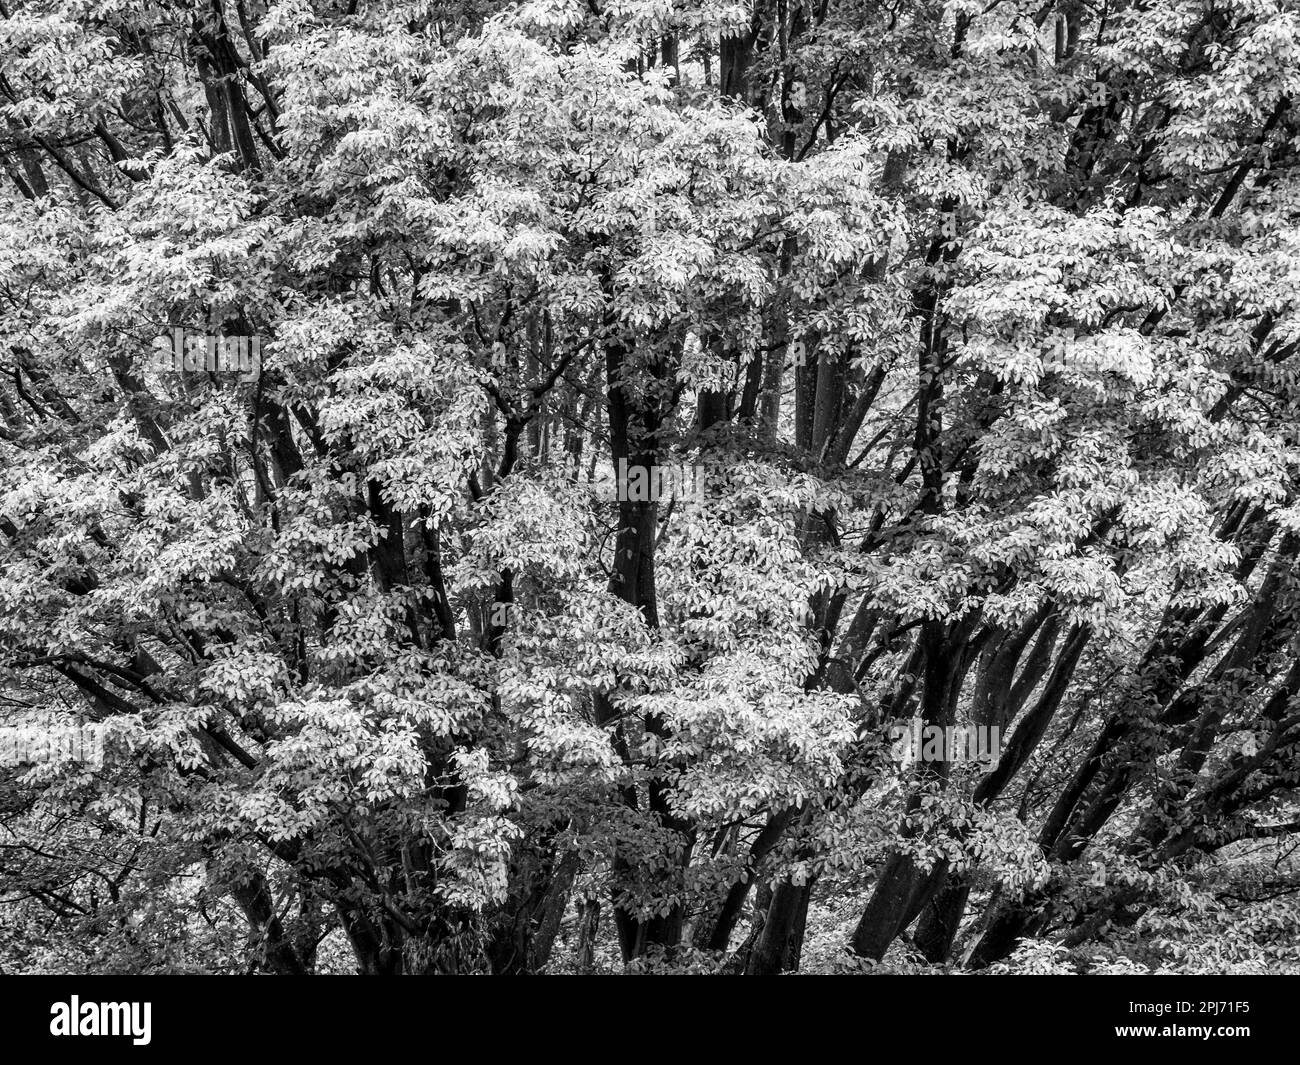 Black and White Landscape of Tree Leaves and Branches, Windsor Great Park, Windsor, Berkshire, England, UK, GB. Stock Photo